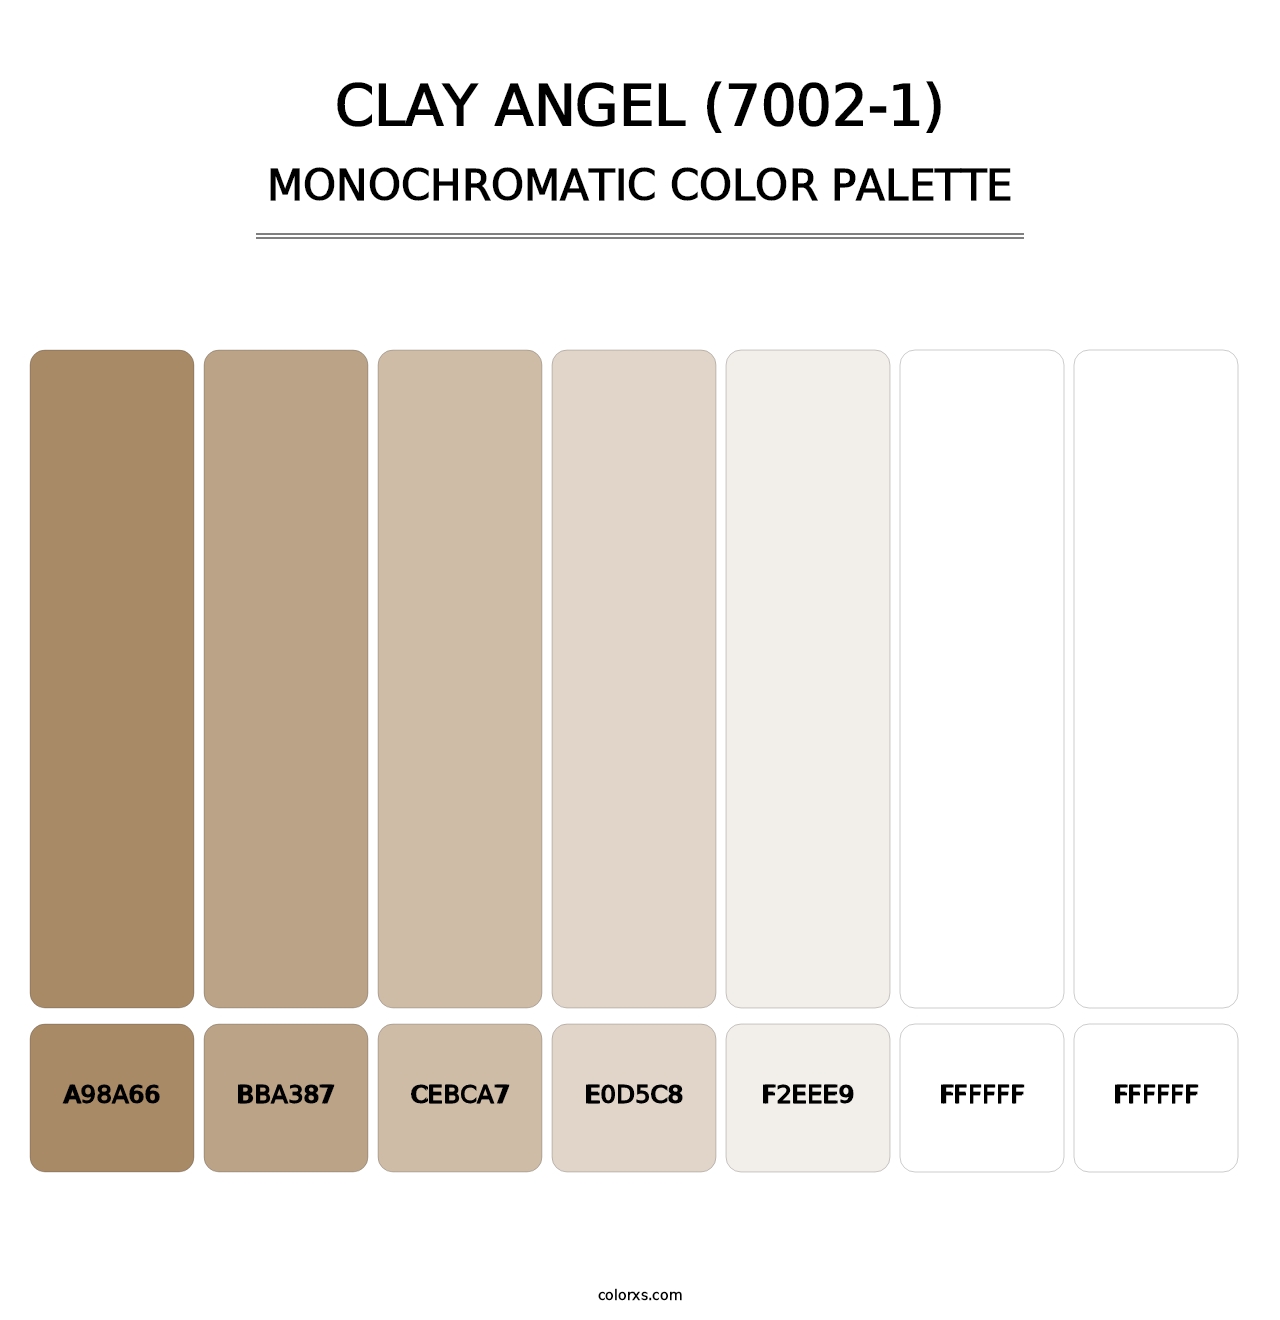 Clay Angel (7002-1) - Monochromatic Color Palette